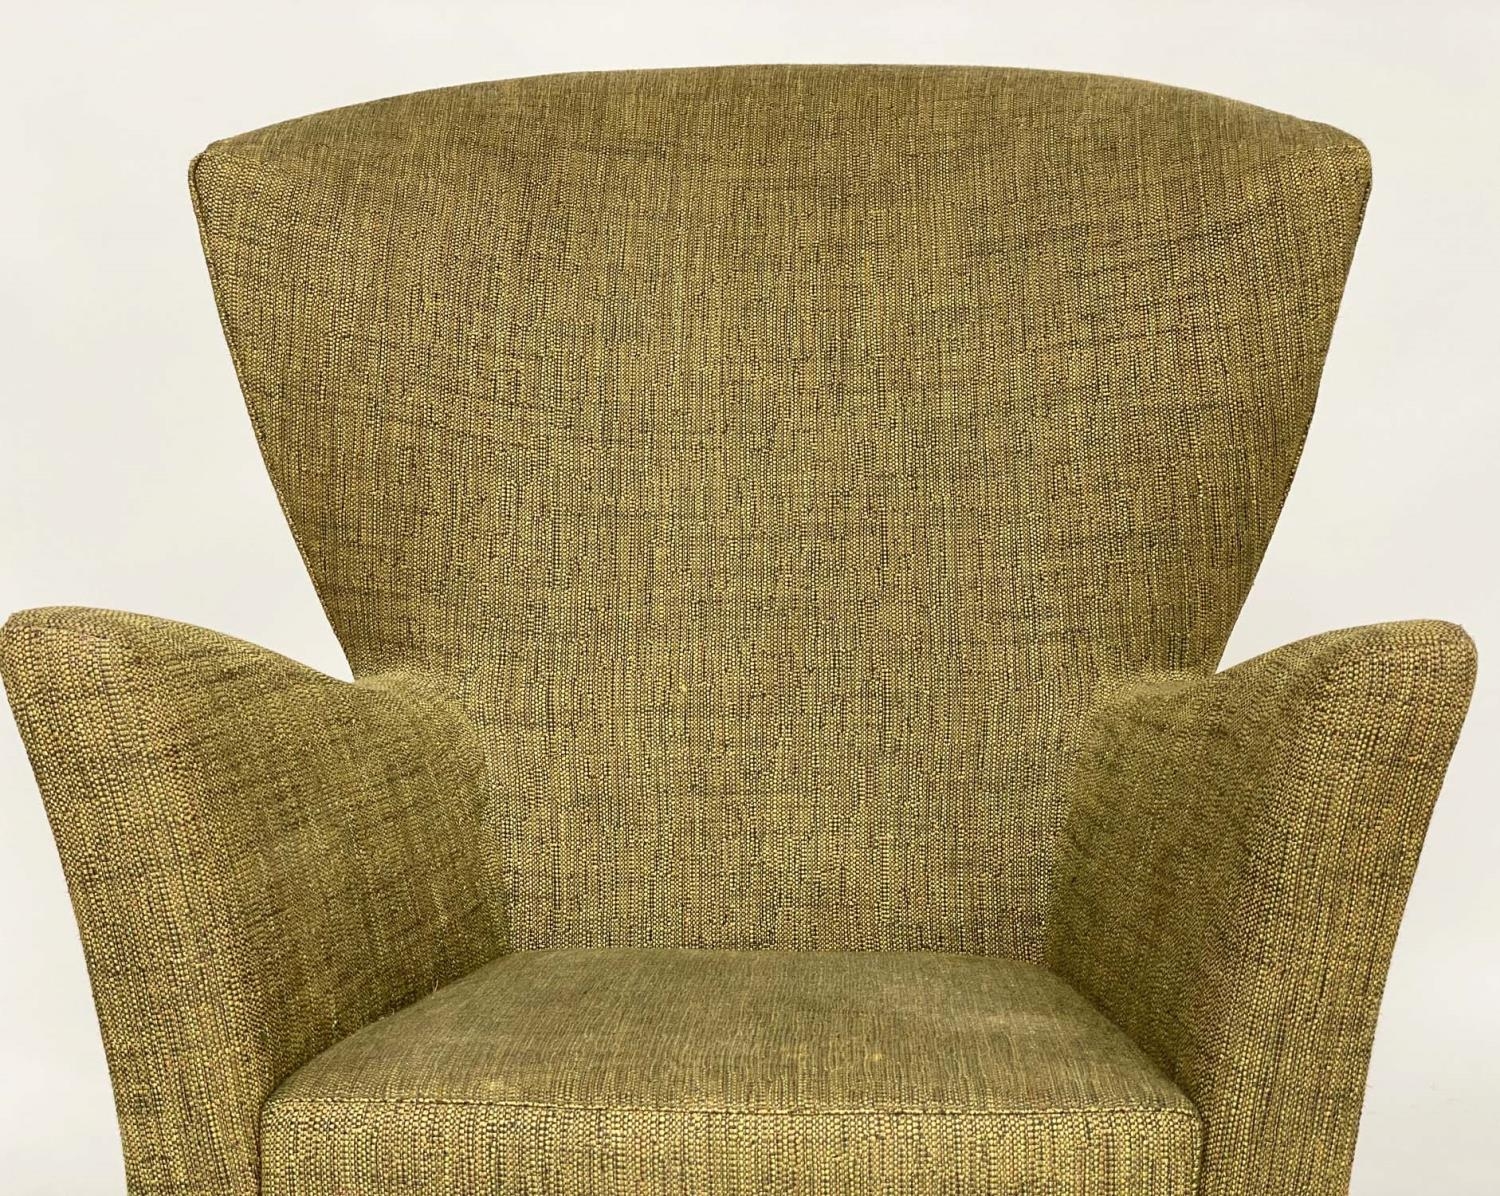 MANNER OF HOWARD KEITH ARMCHAIR, vintage 60s with wing back angular arms and green linen weave - Image 2 of 5